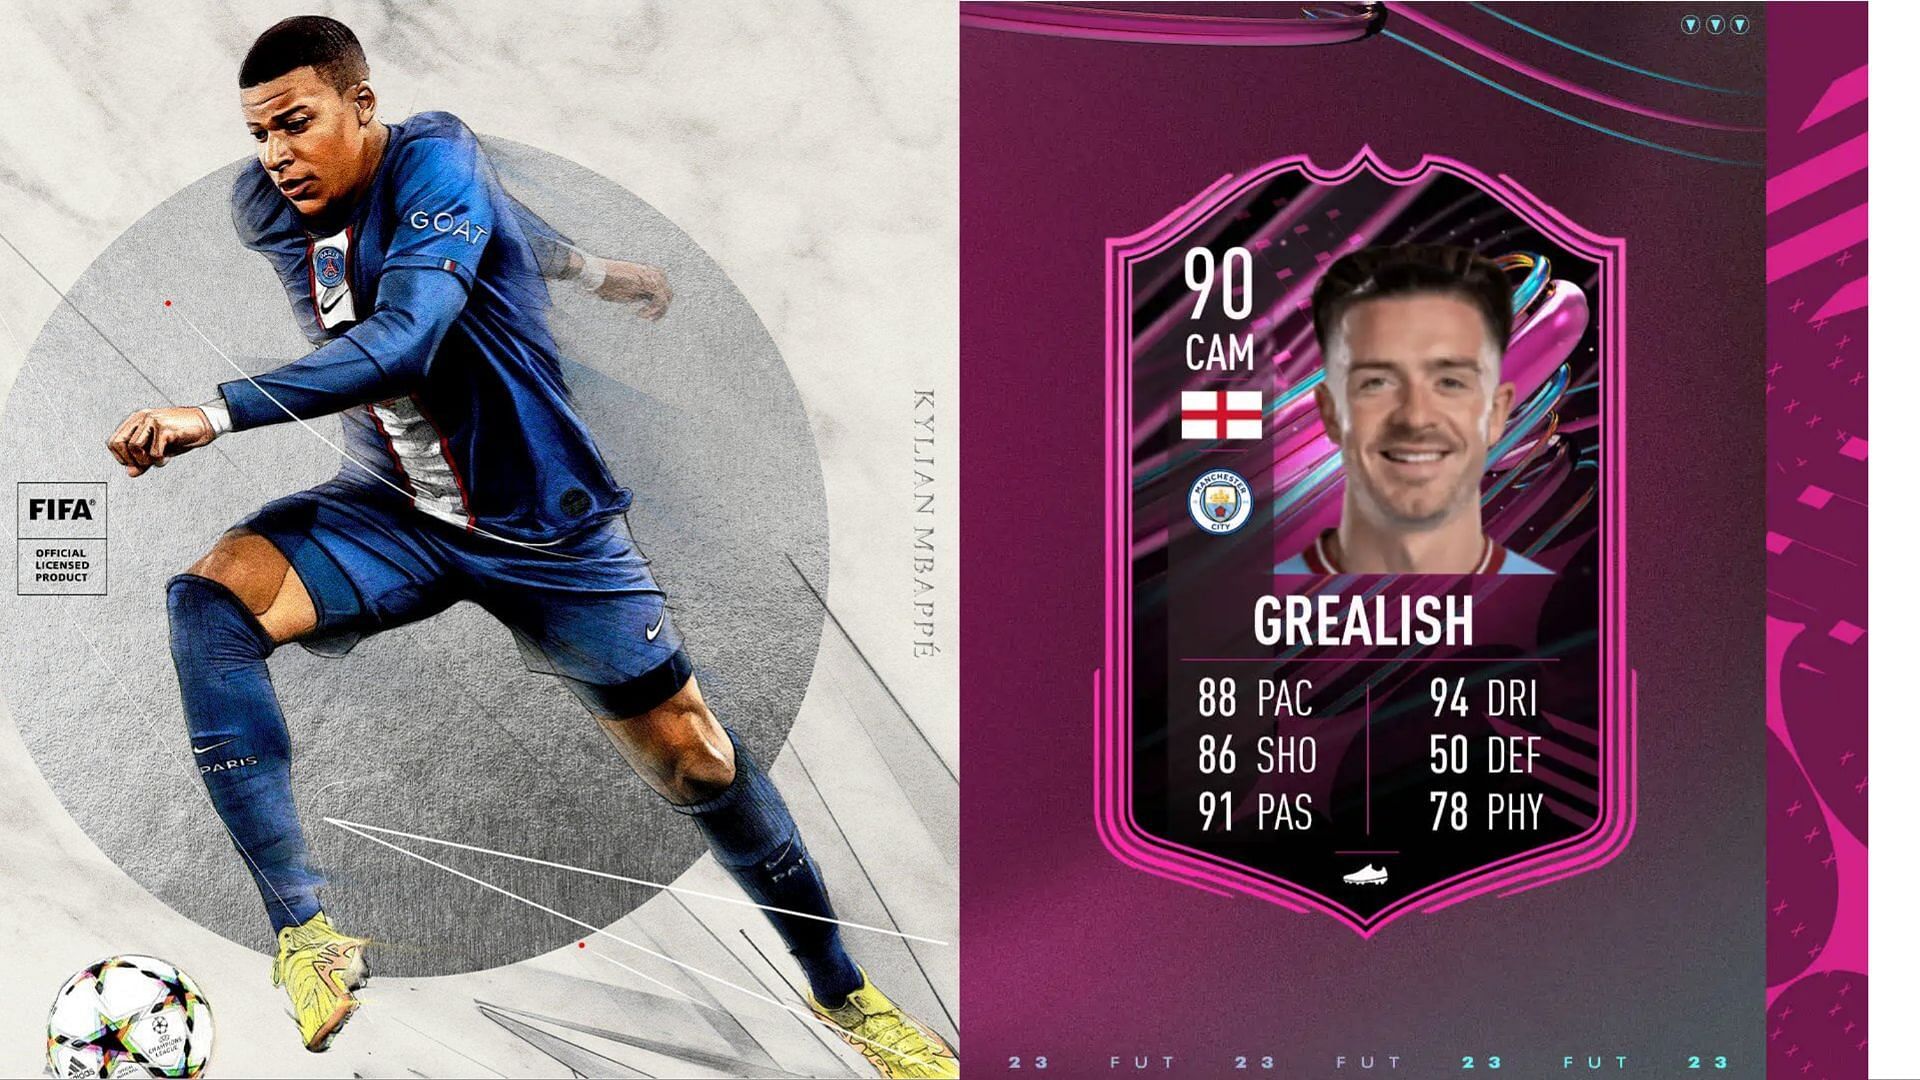 The FIFA 23 Jack Grealish FUT Ballers SBC has incredible value even if someone doesn